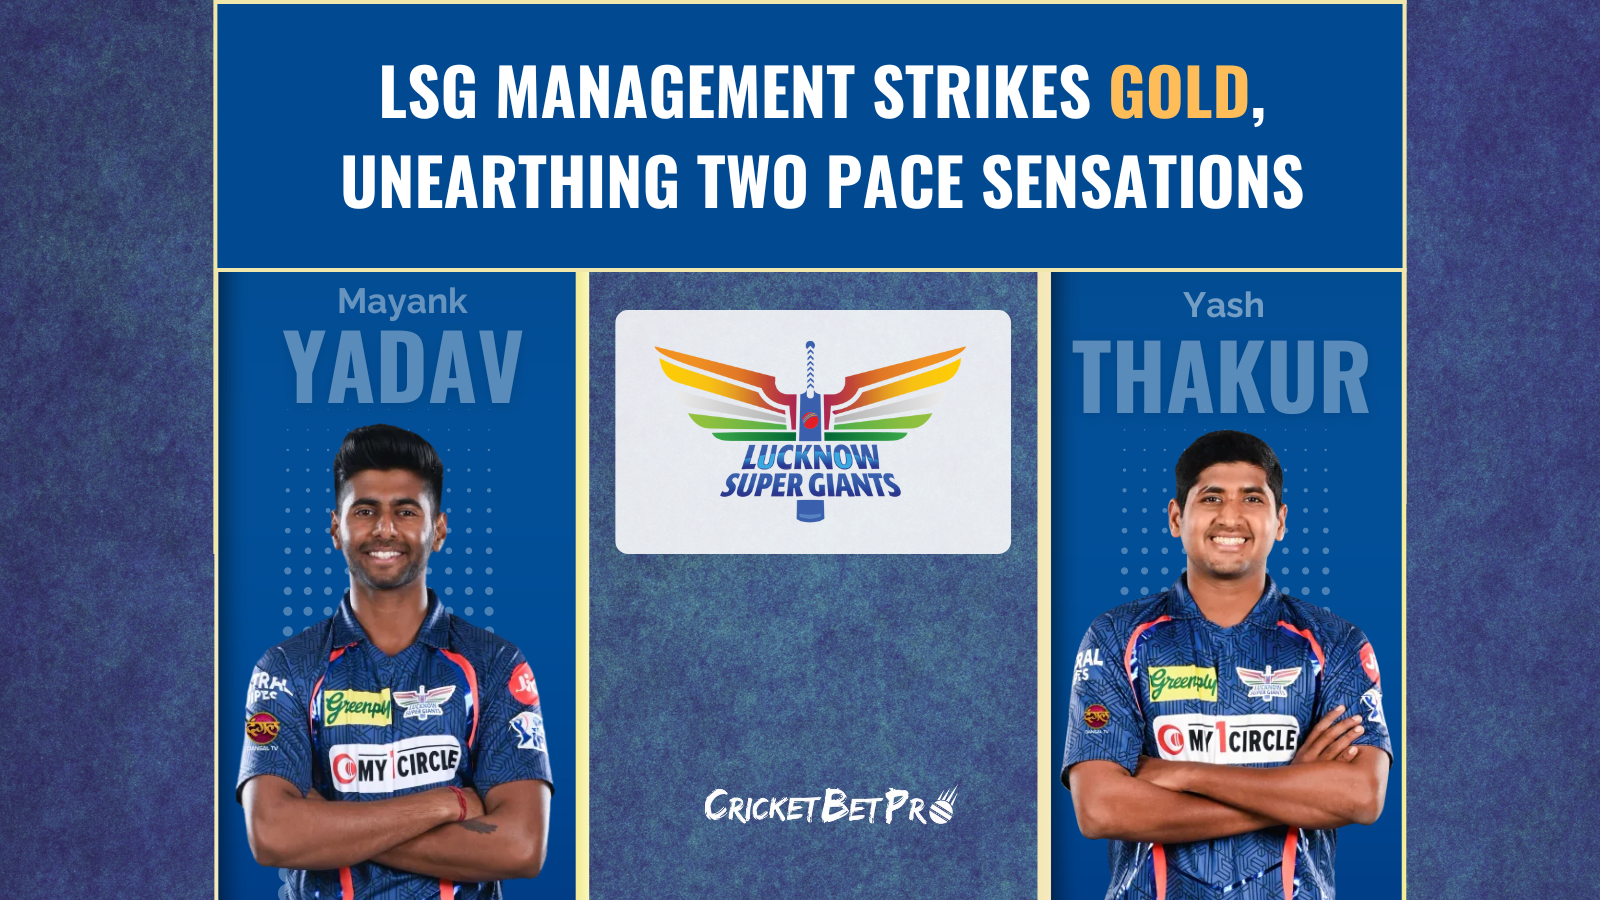 LSG Management Strikes Gold, Unearthing Two Pace Sensations